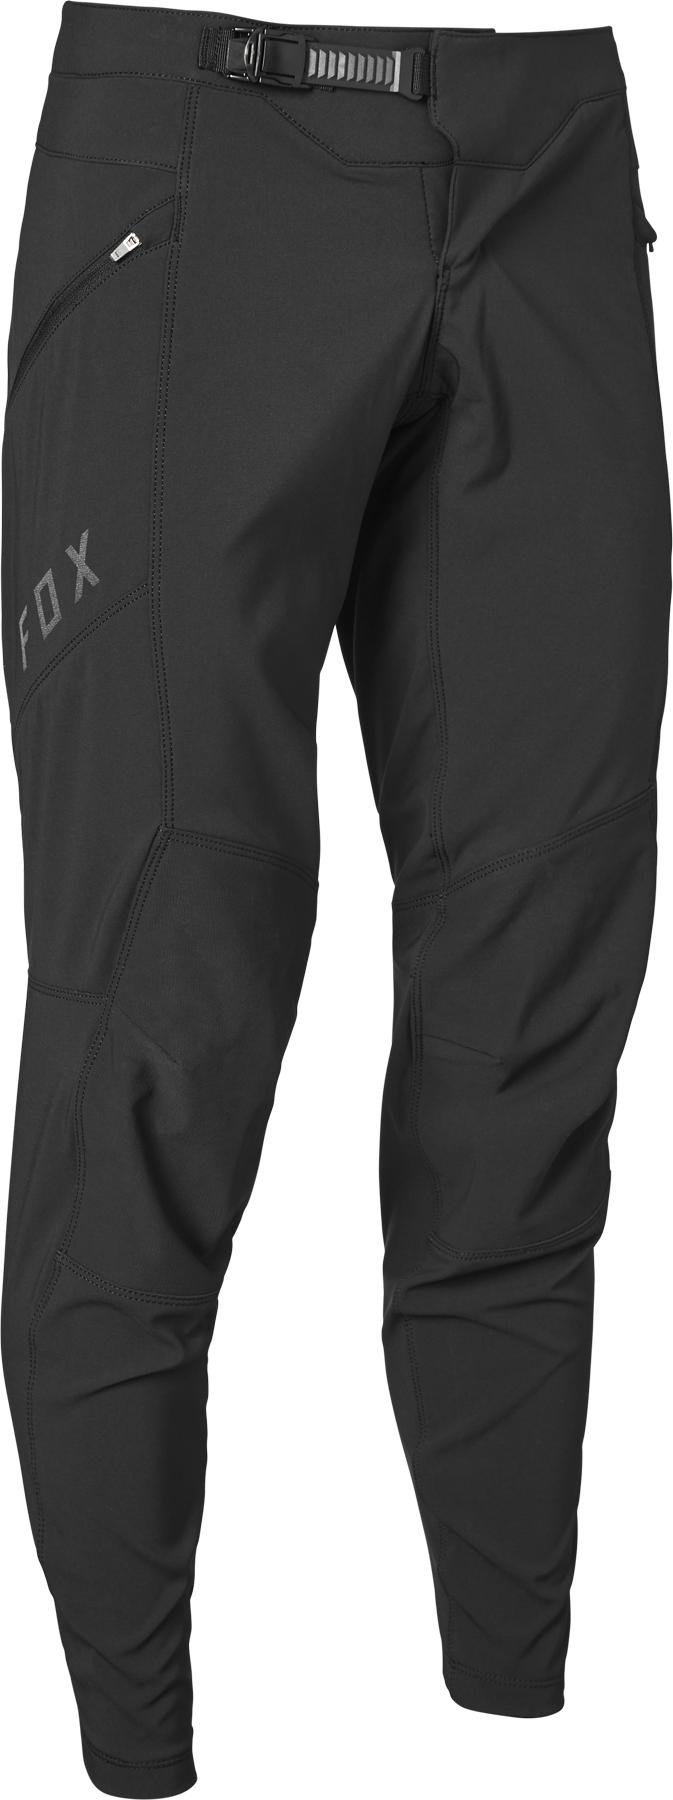 Fox Racing Womens Defend Fire Trousers  Black